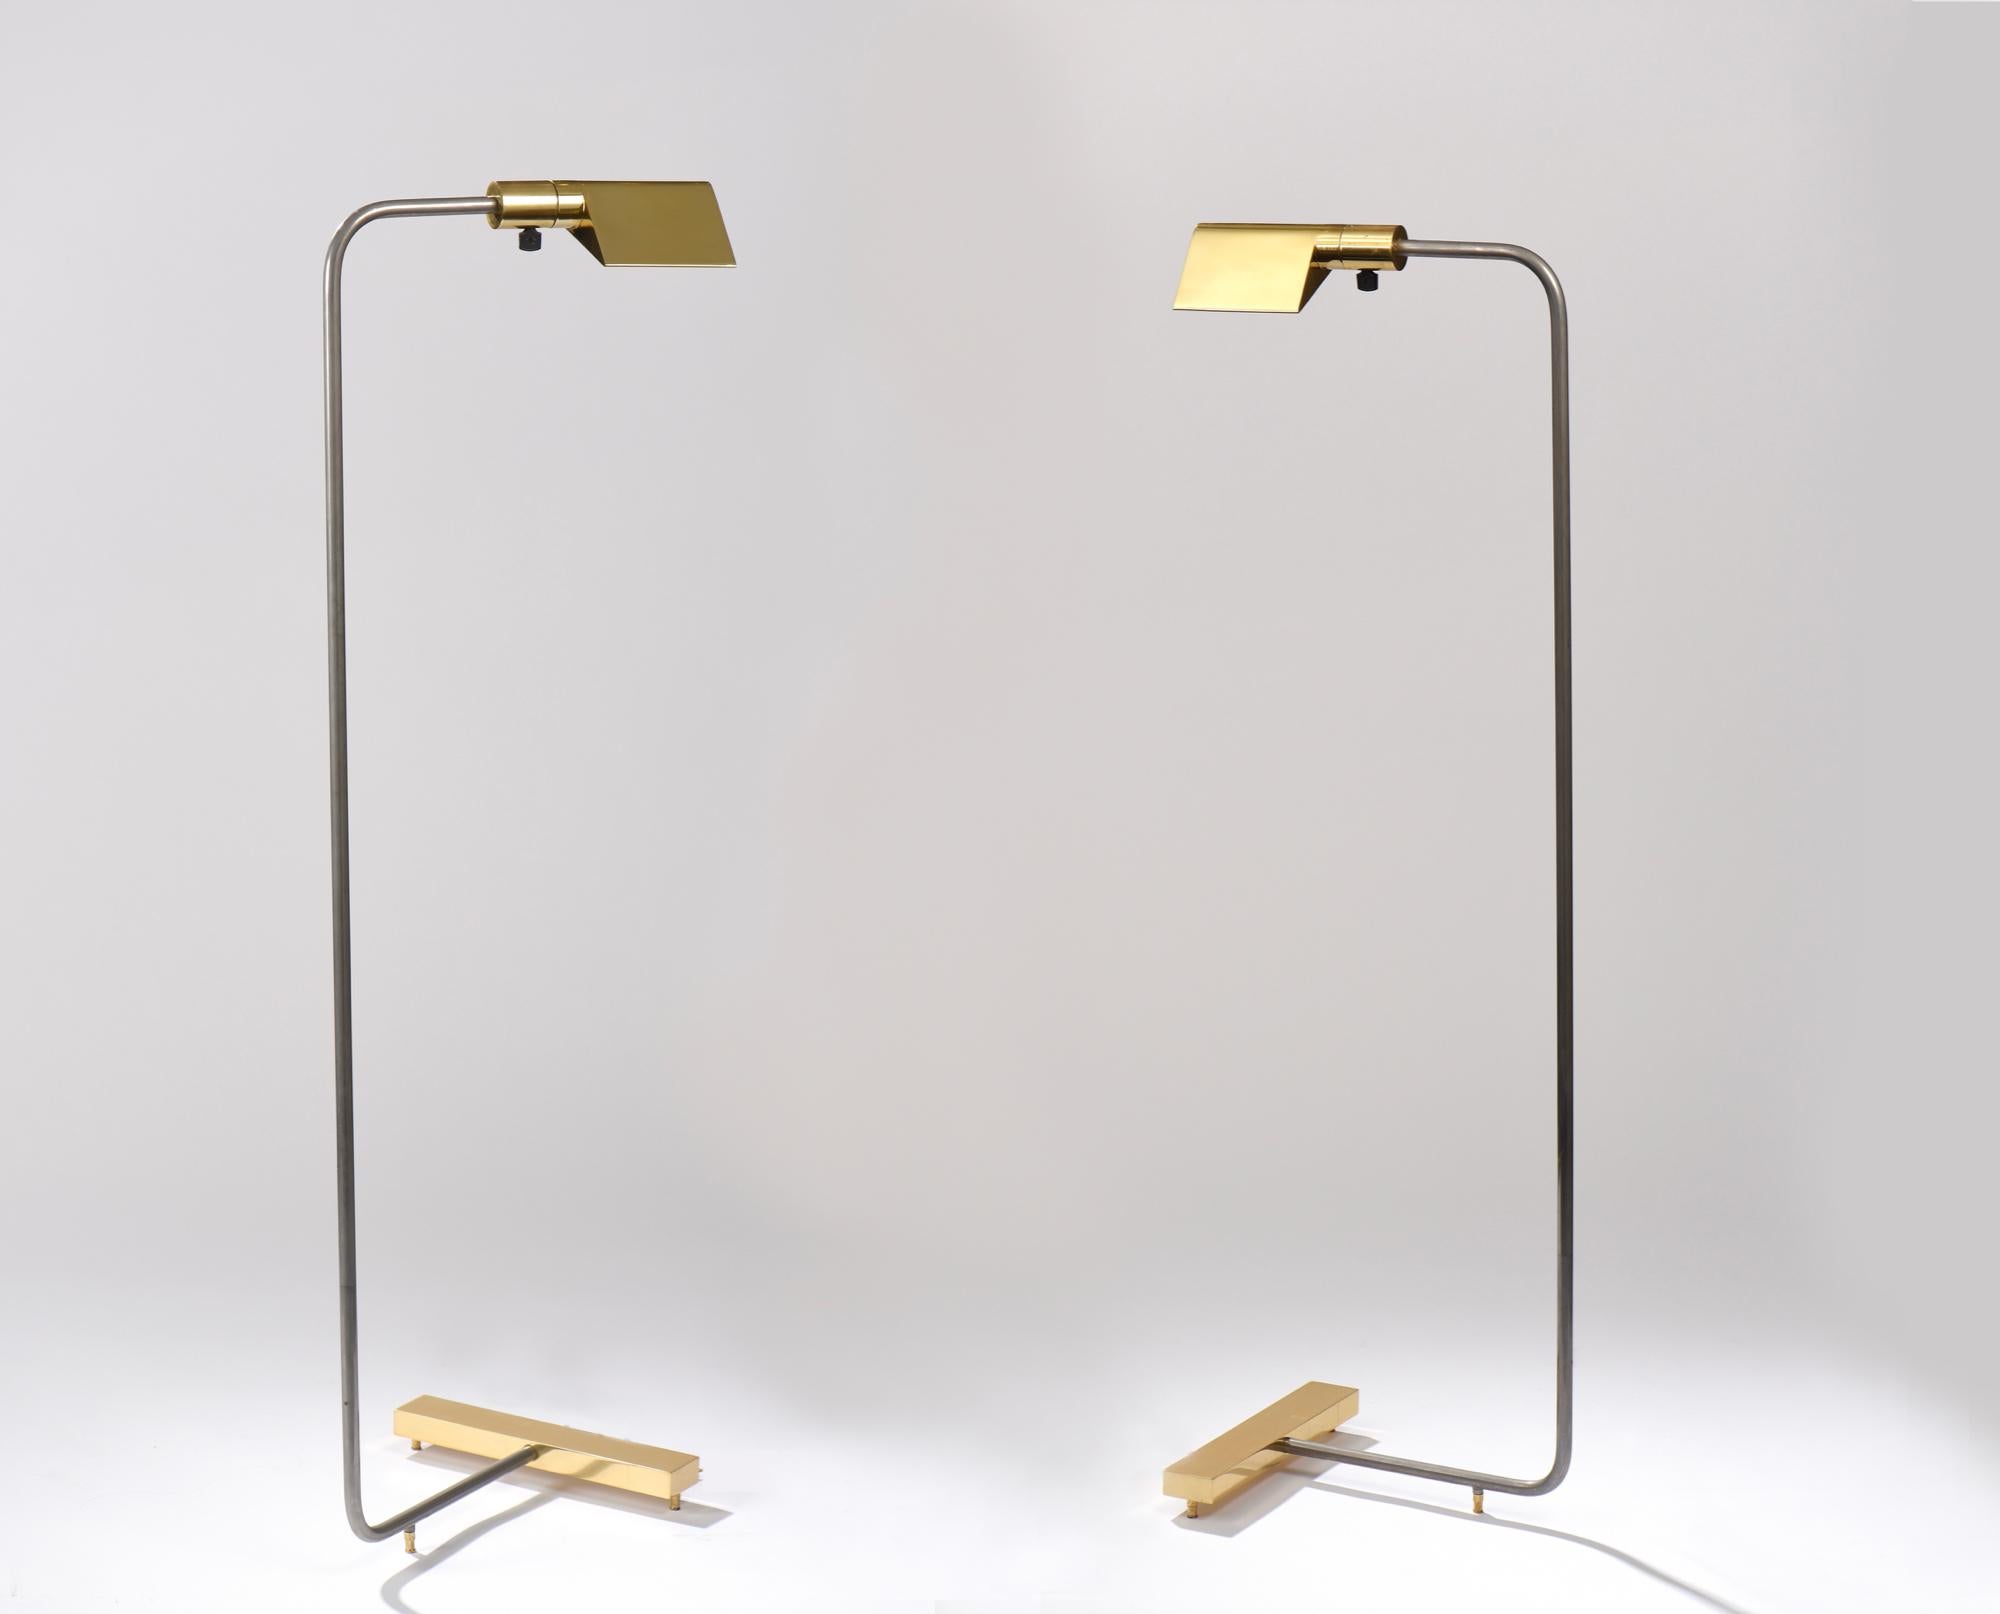 Single-light reading lamp surmounted by a conical adjustable brass bulb cover, central tube in metal on a rectangular base.
Model designed in collaboration with Yves Saint Laurent.